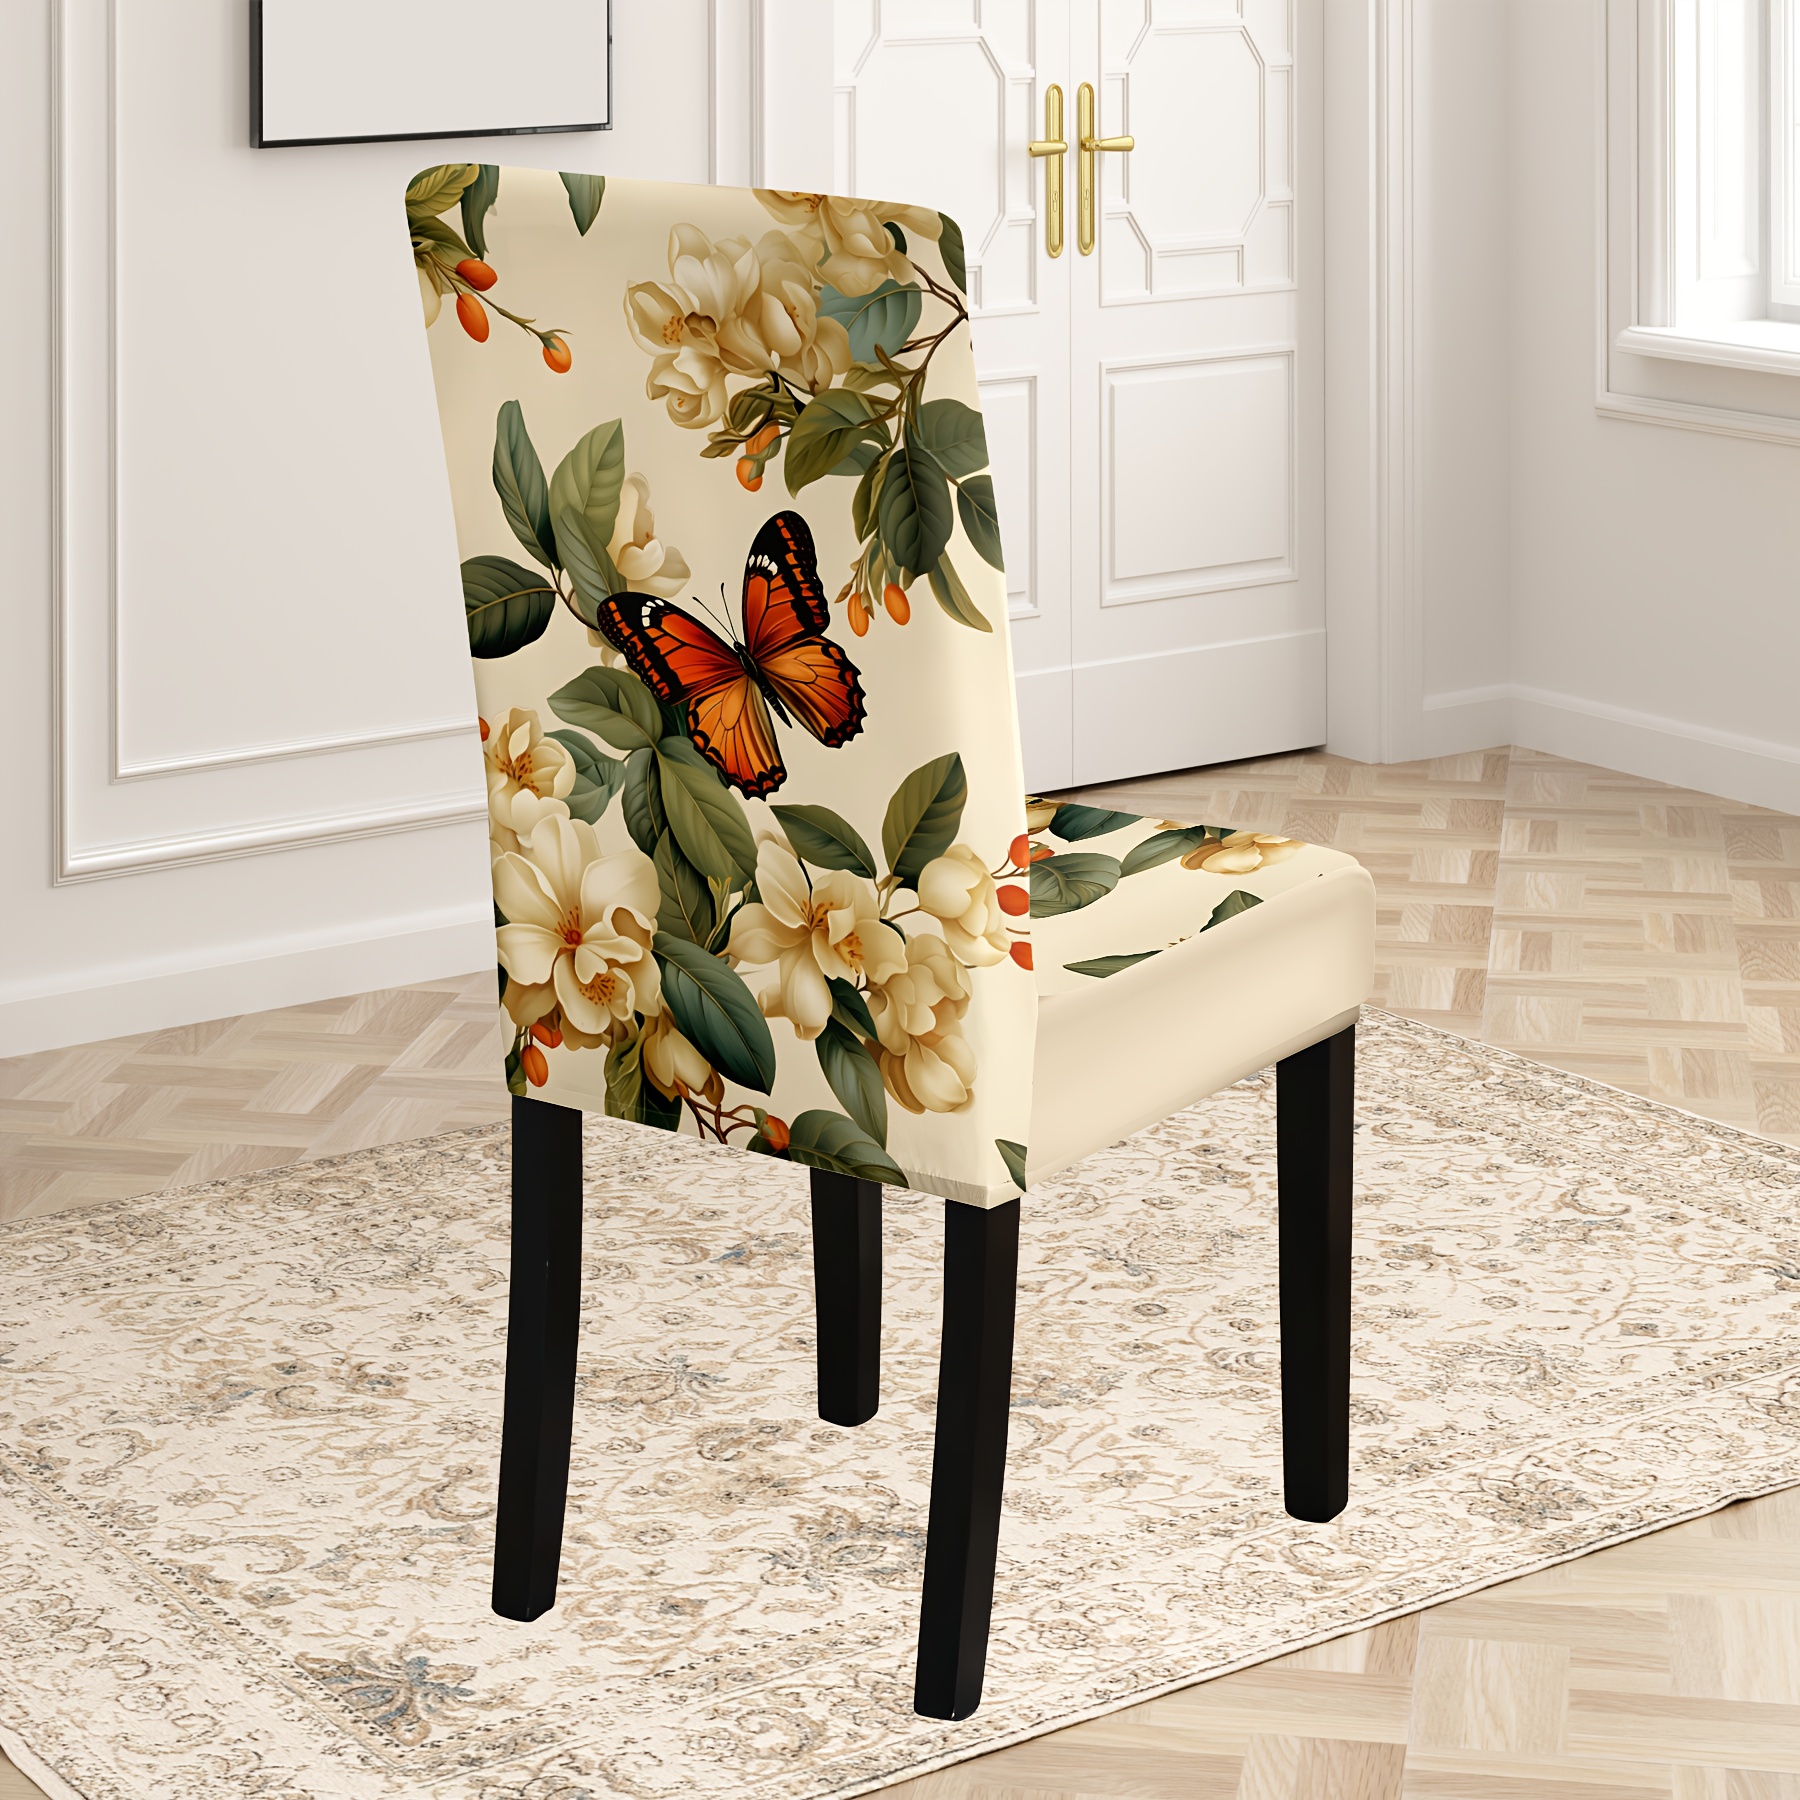 

4pcs/6pcs Classic Butterfly And Floral Print Dining Chair Slipcovers, Elastic-band Design, High Stretch Polyester 88%, Spandex 12%, Machine Washable, Dirt-resistant, Home Chair Decor Covers